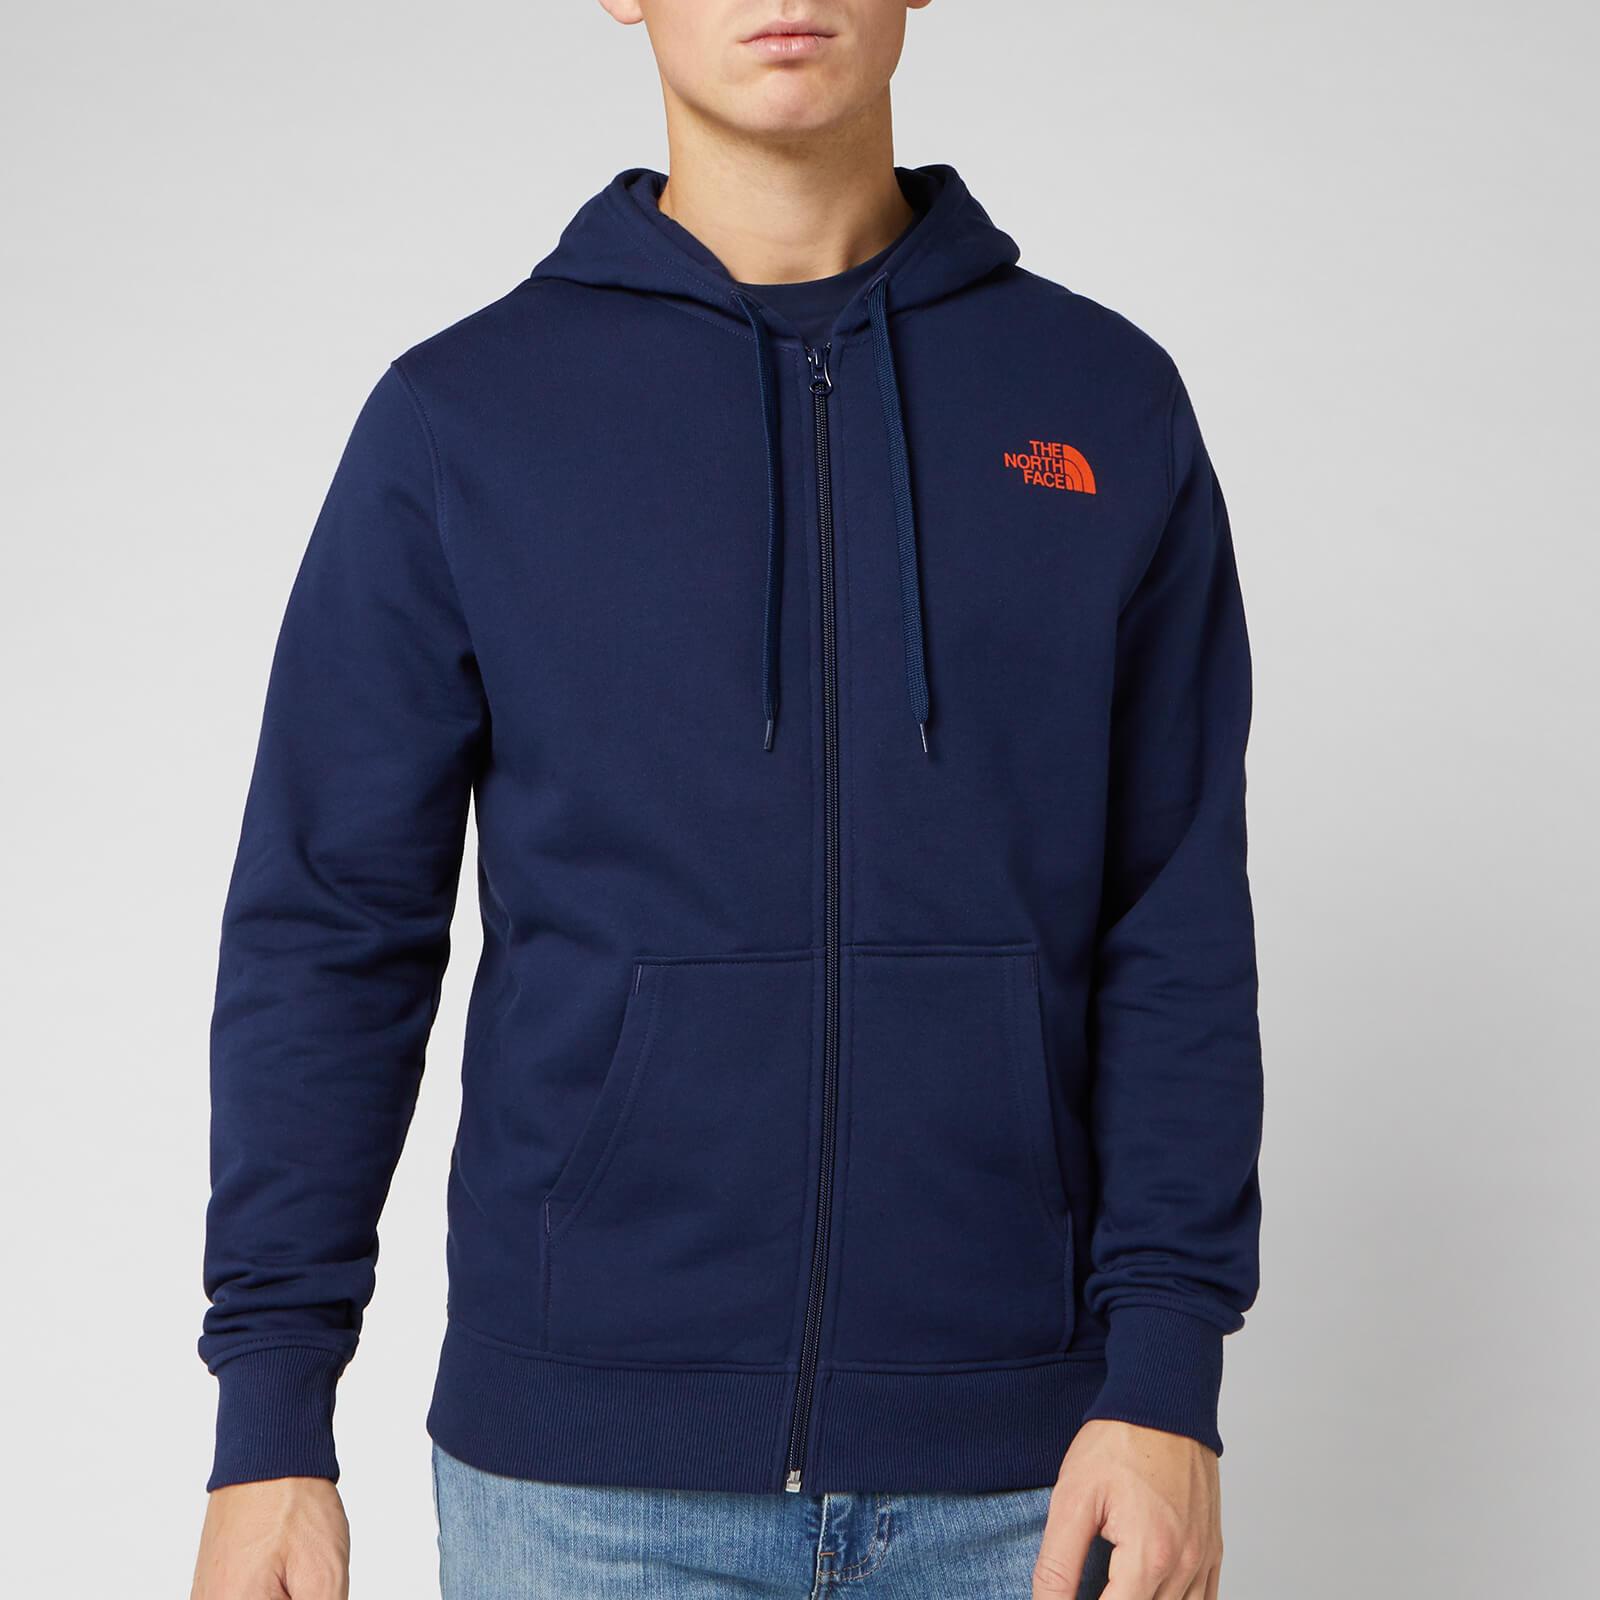 The North Face Open Gate Full Zip Hoody in Blue for Men - Lyst